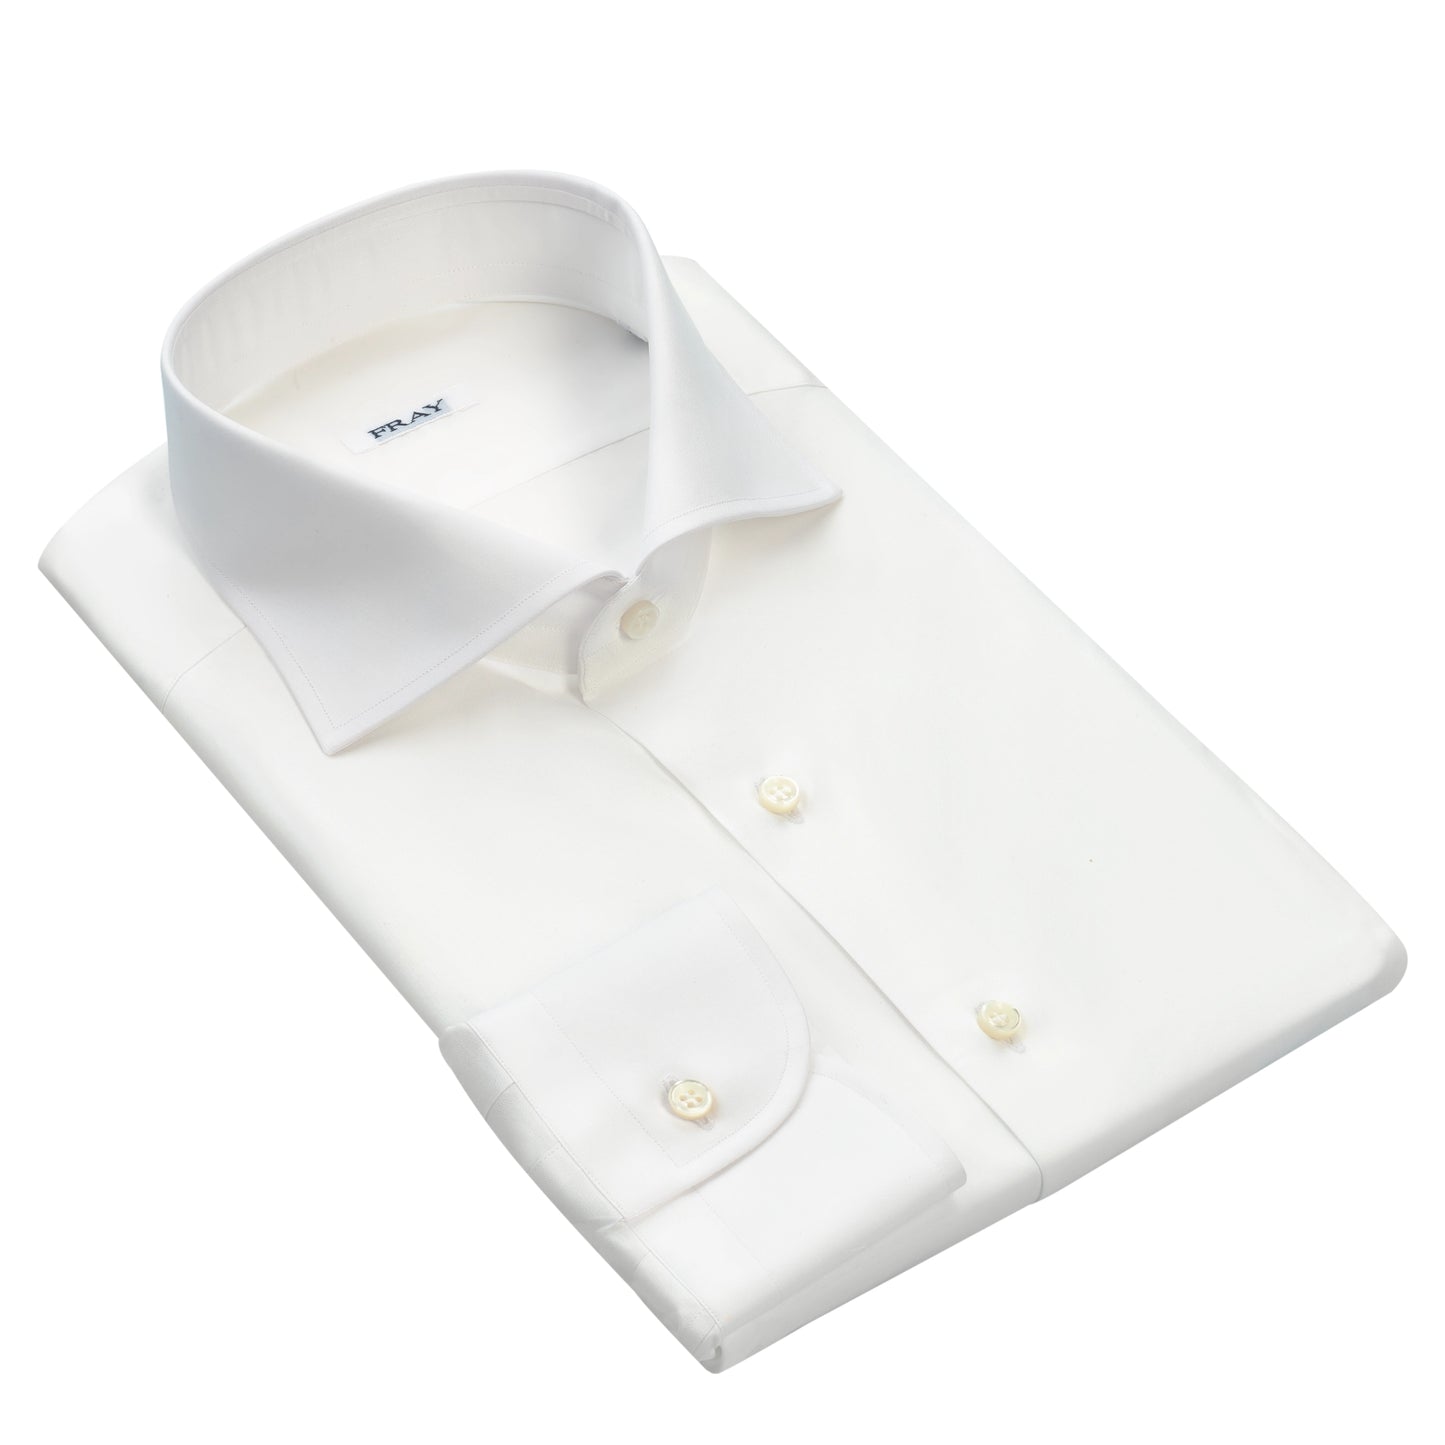 Classic Cotton Shirt in White with Cutaway Collar